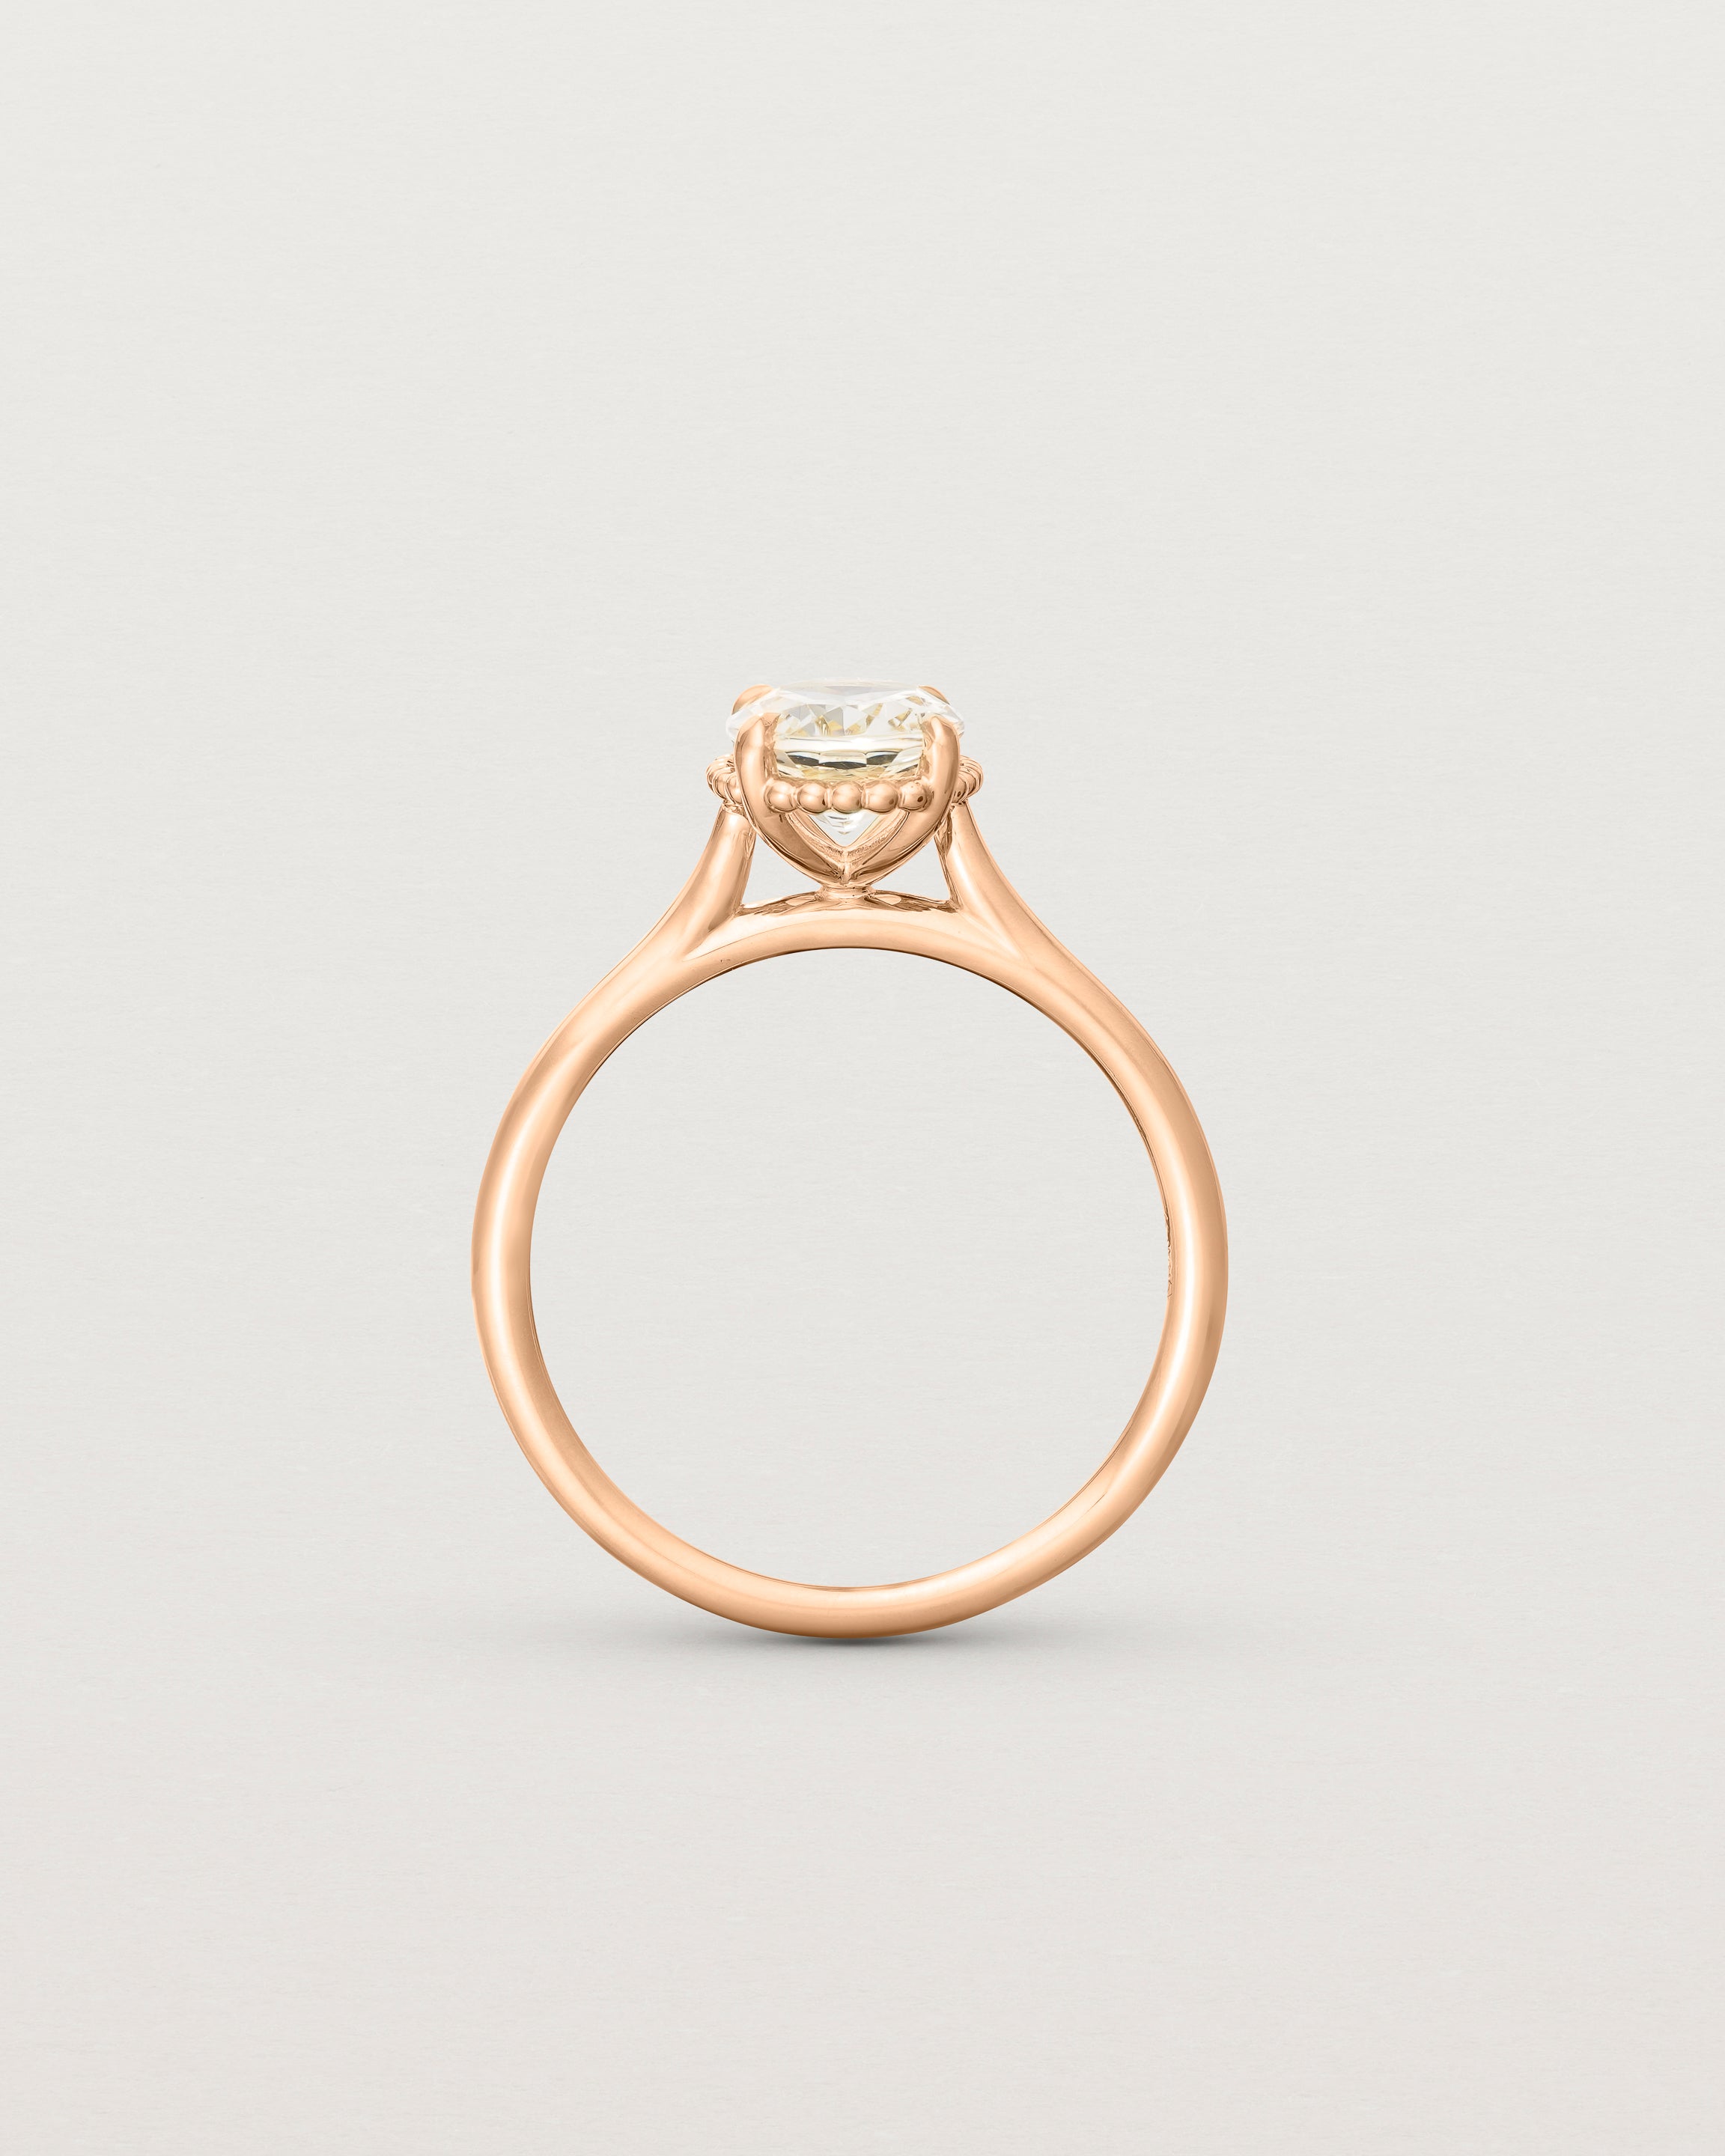 Standing view of the Thea Oval Solitaire | Savannah Sunstone in rose gold.